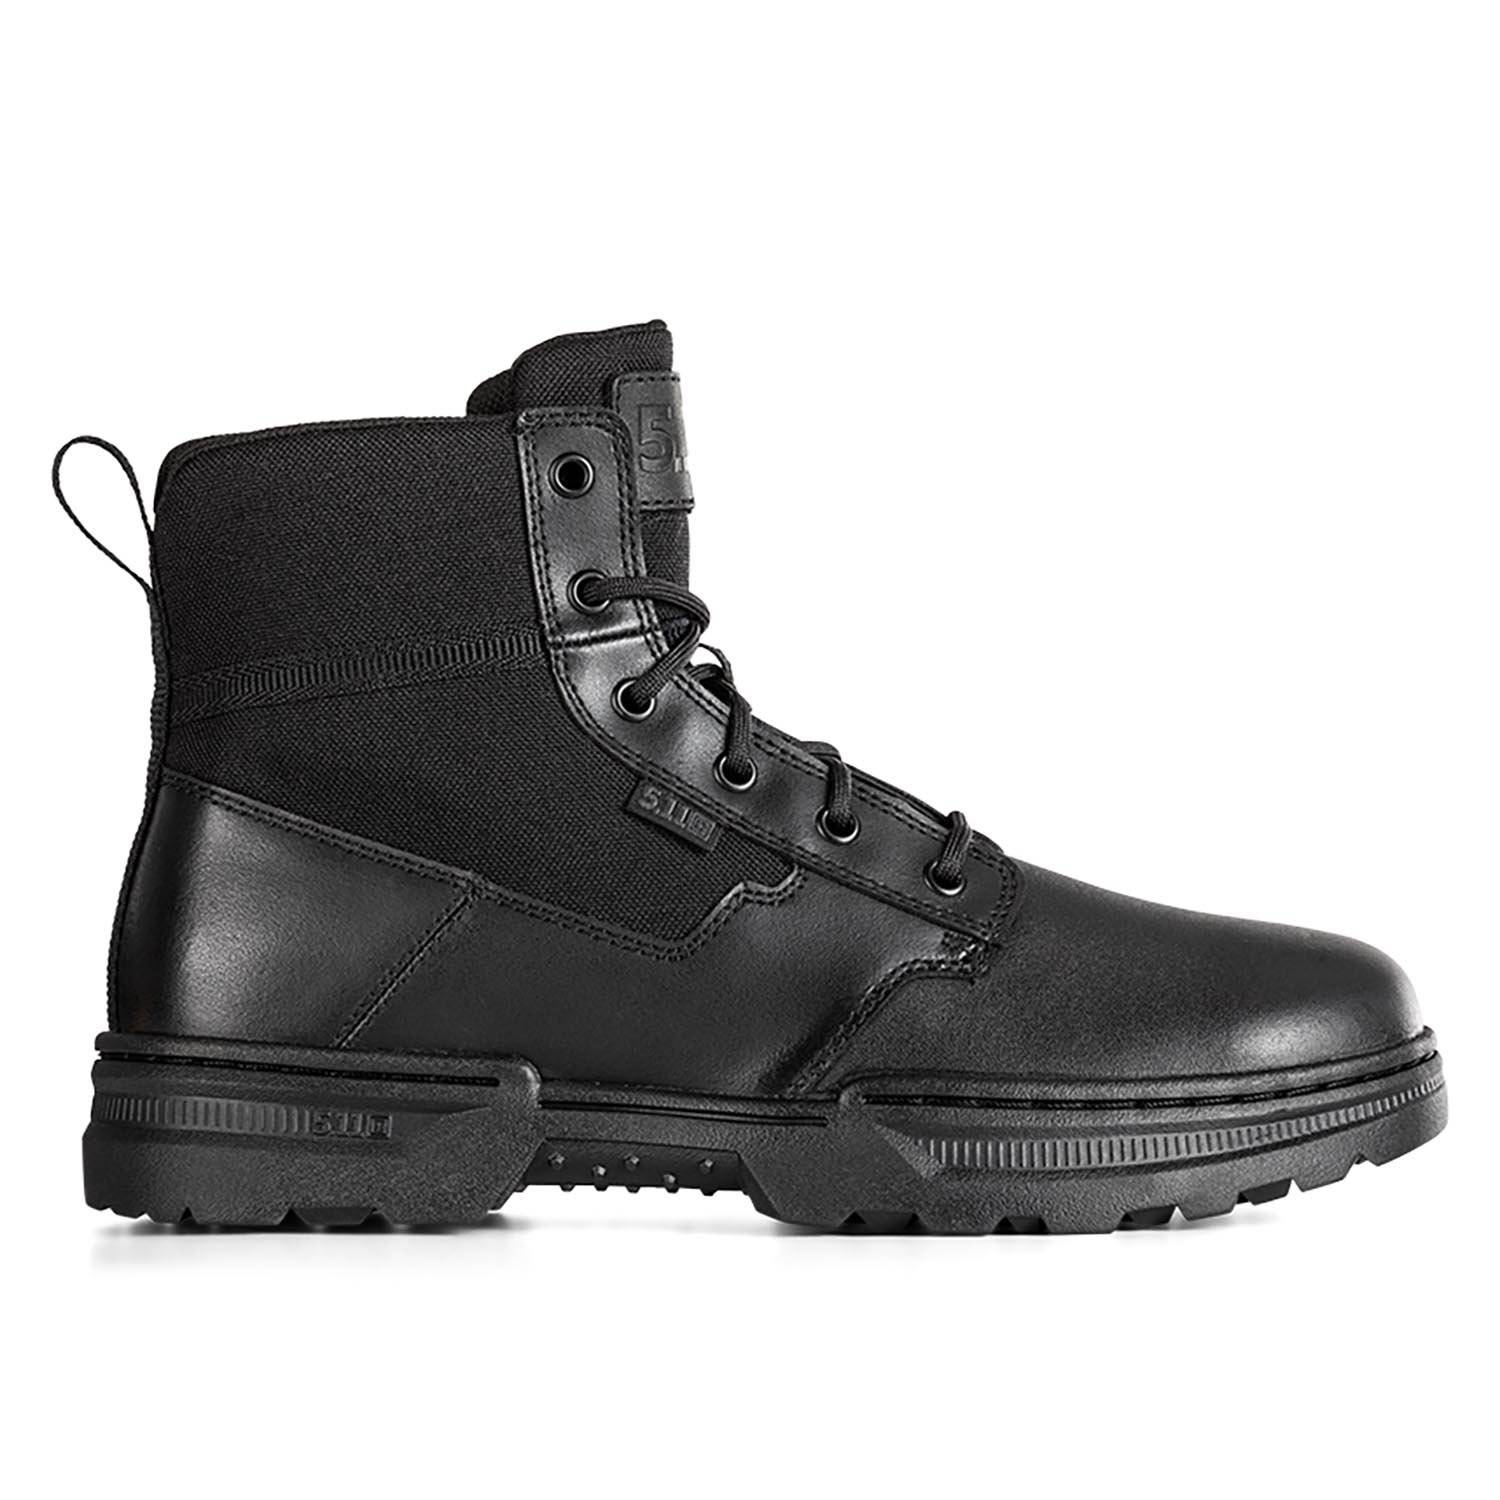 5.11 Tactical Speed 4.0 6" Boots